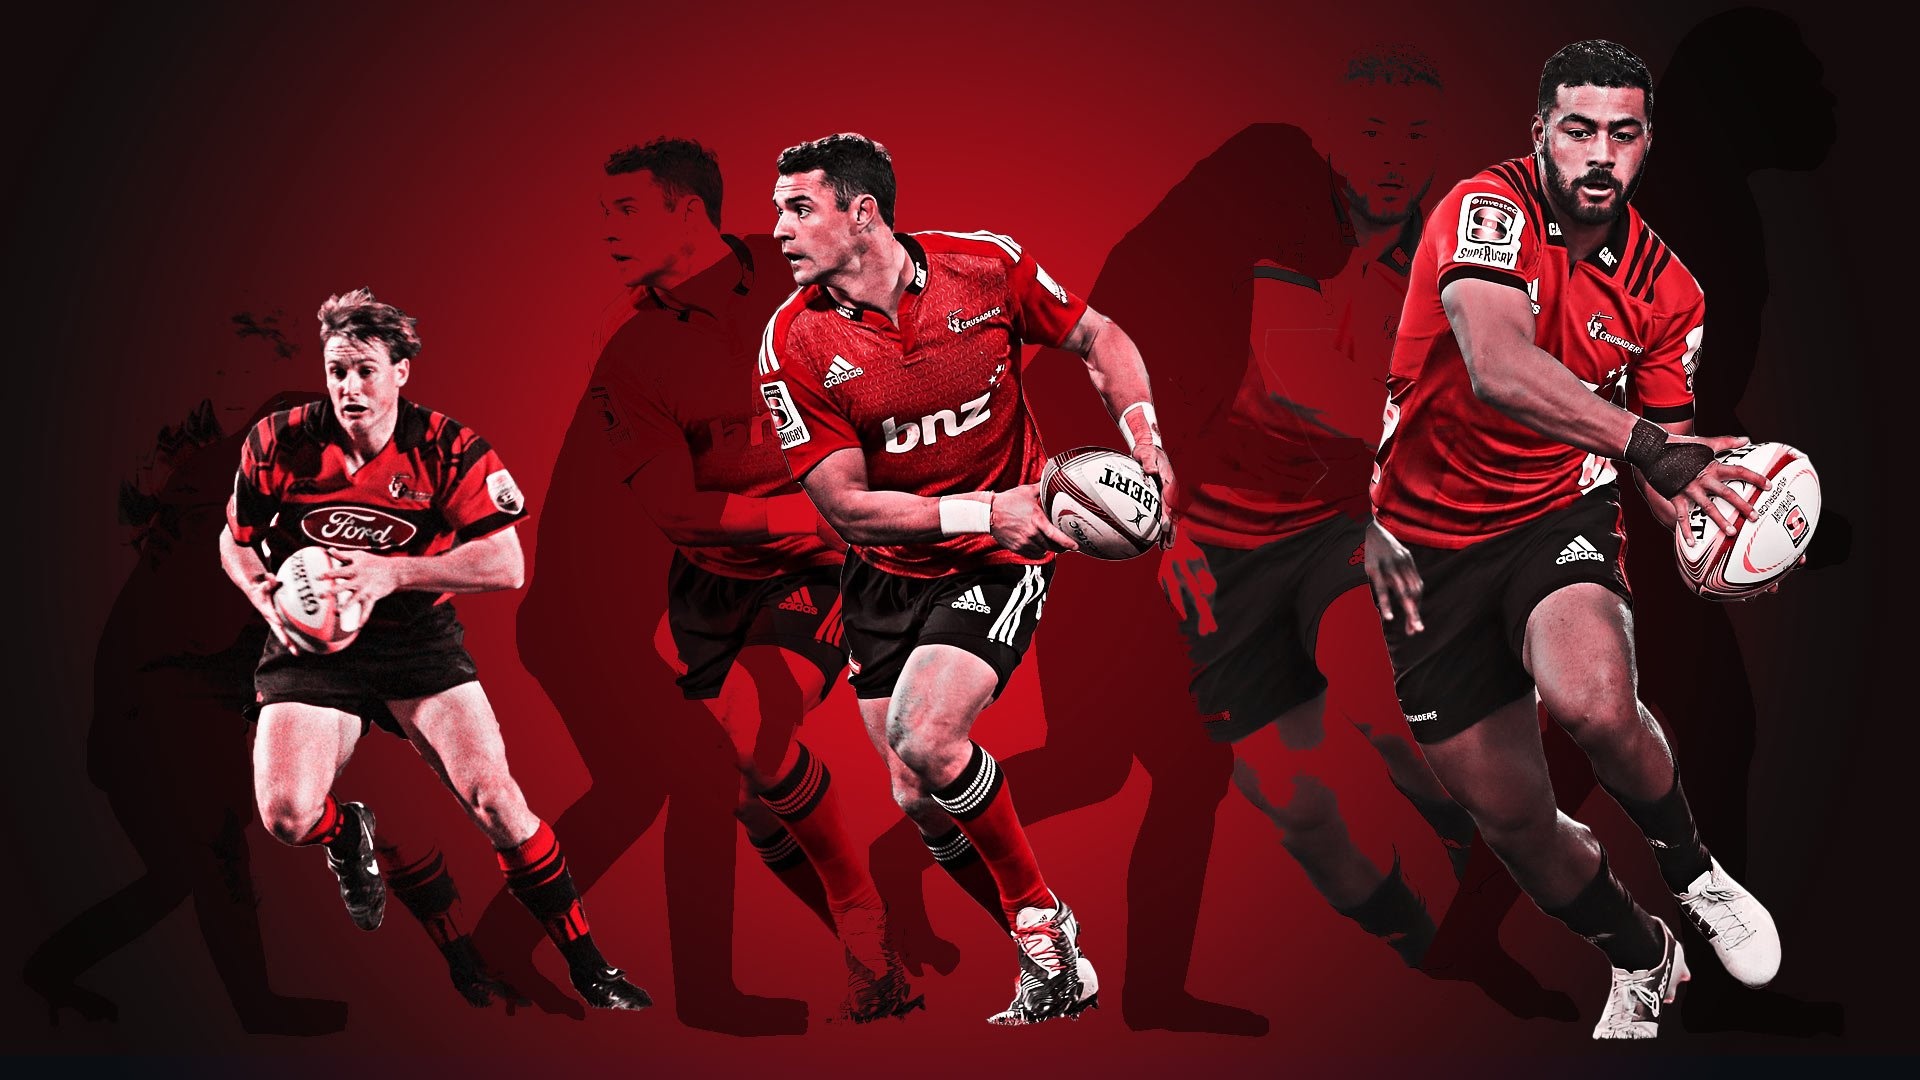 Super Rugby, New Zealand rugby, Strong competition, Top-tier athletes, 1920x1080 Full HD Desktop